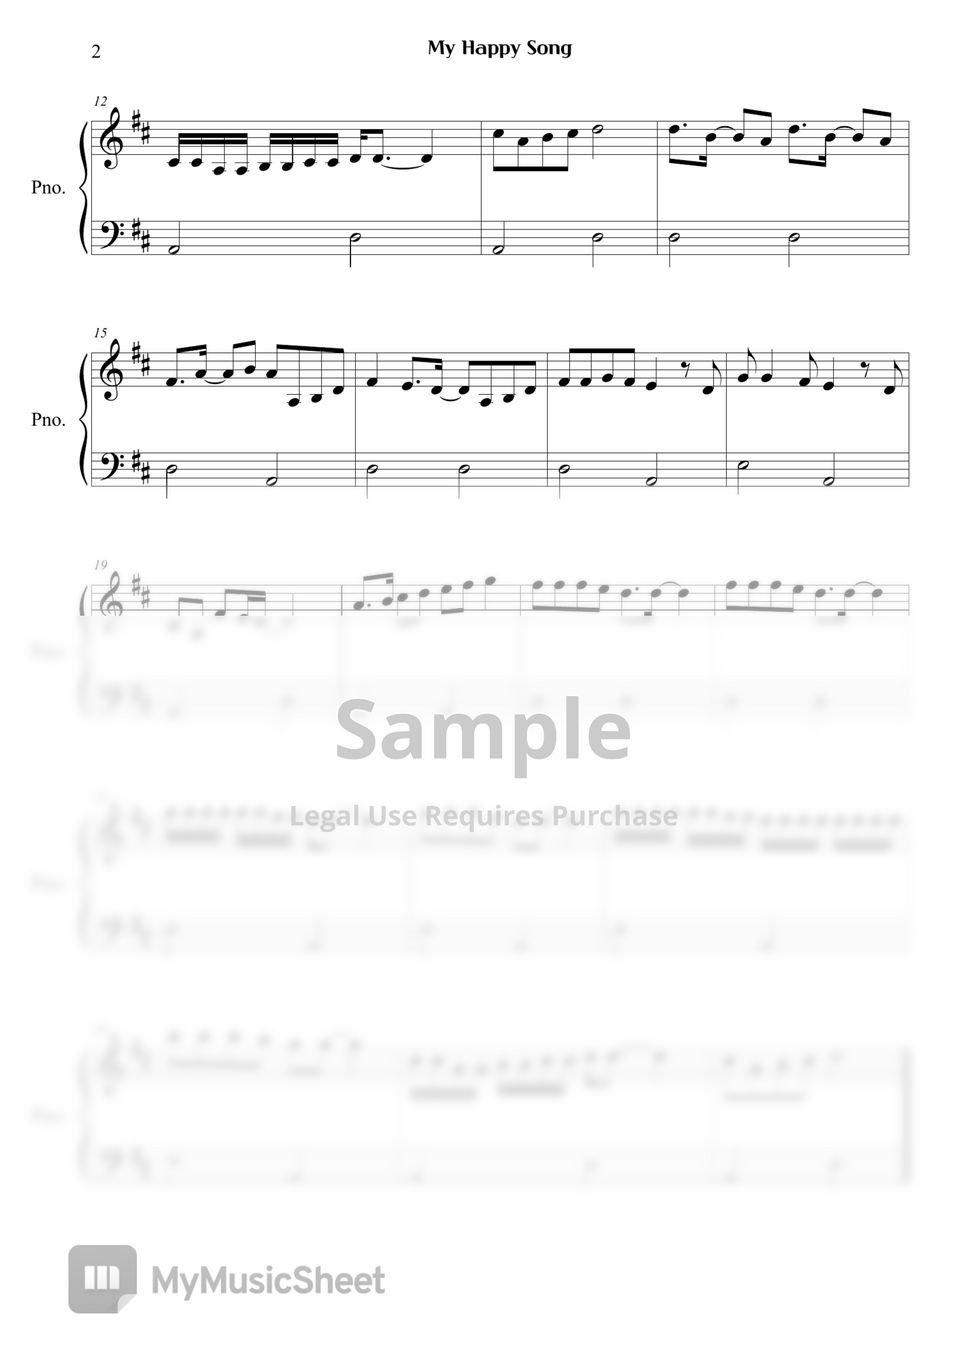 Super Simple Songs - My Happy Song Sheets by Right Now Piano